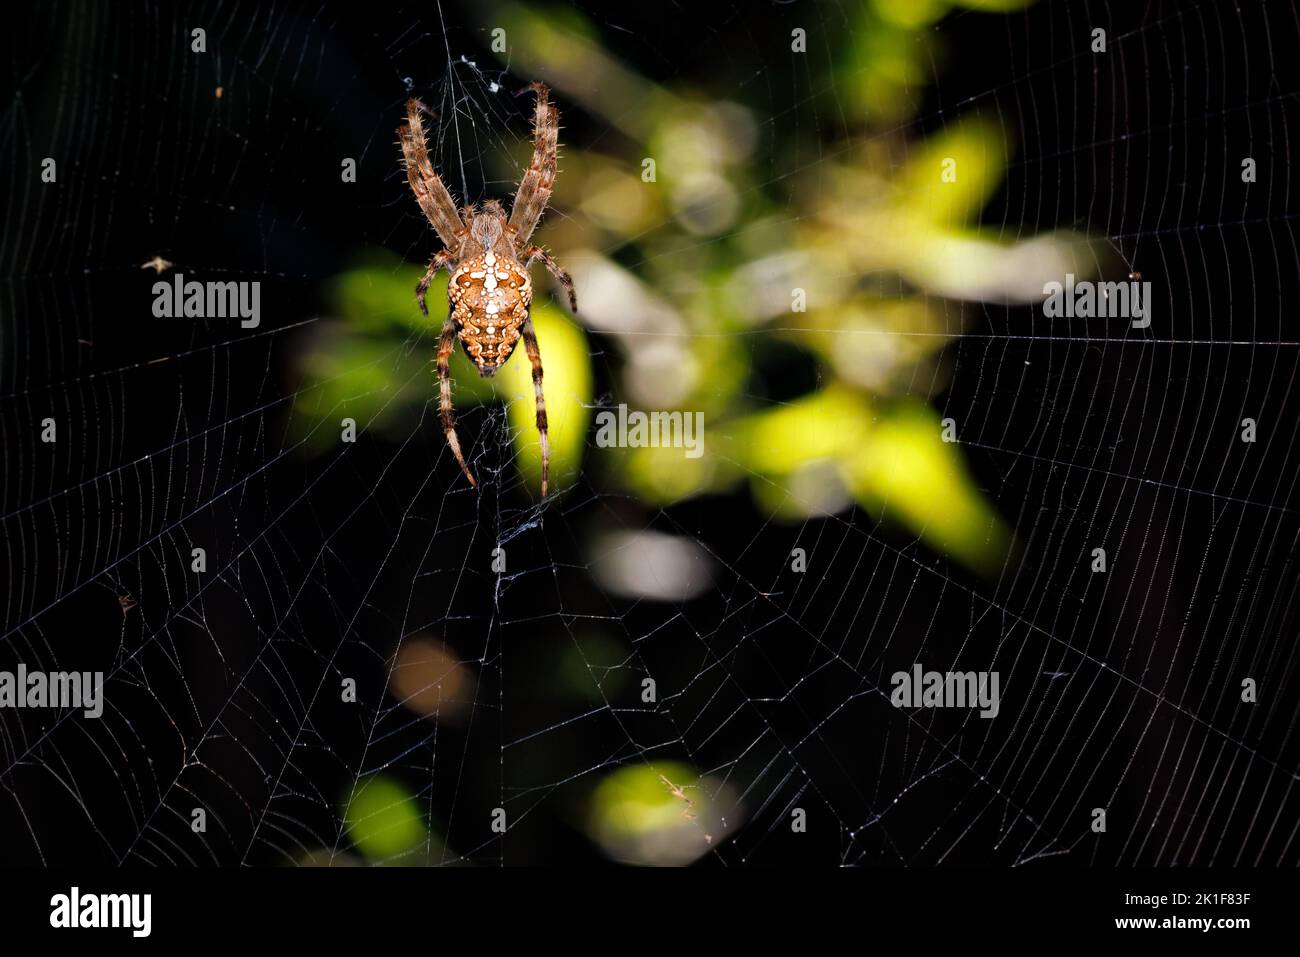 A venomous spider at work creating its sticky web against a dark background of blurred green foliage. Close-up, copy space. Stock Photo